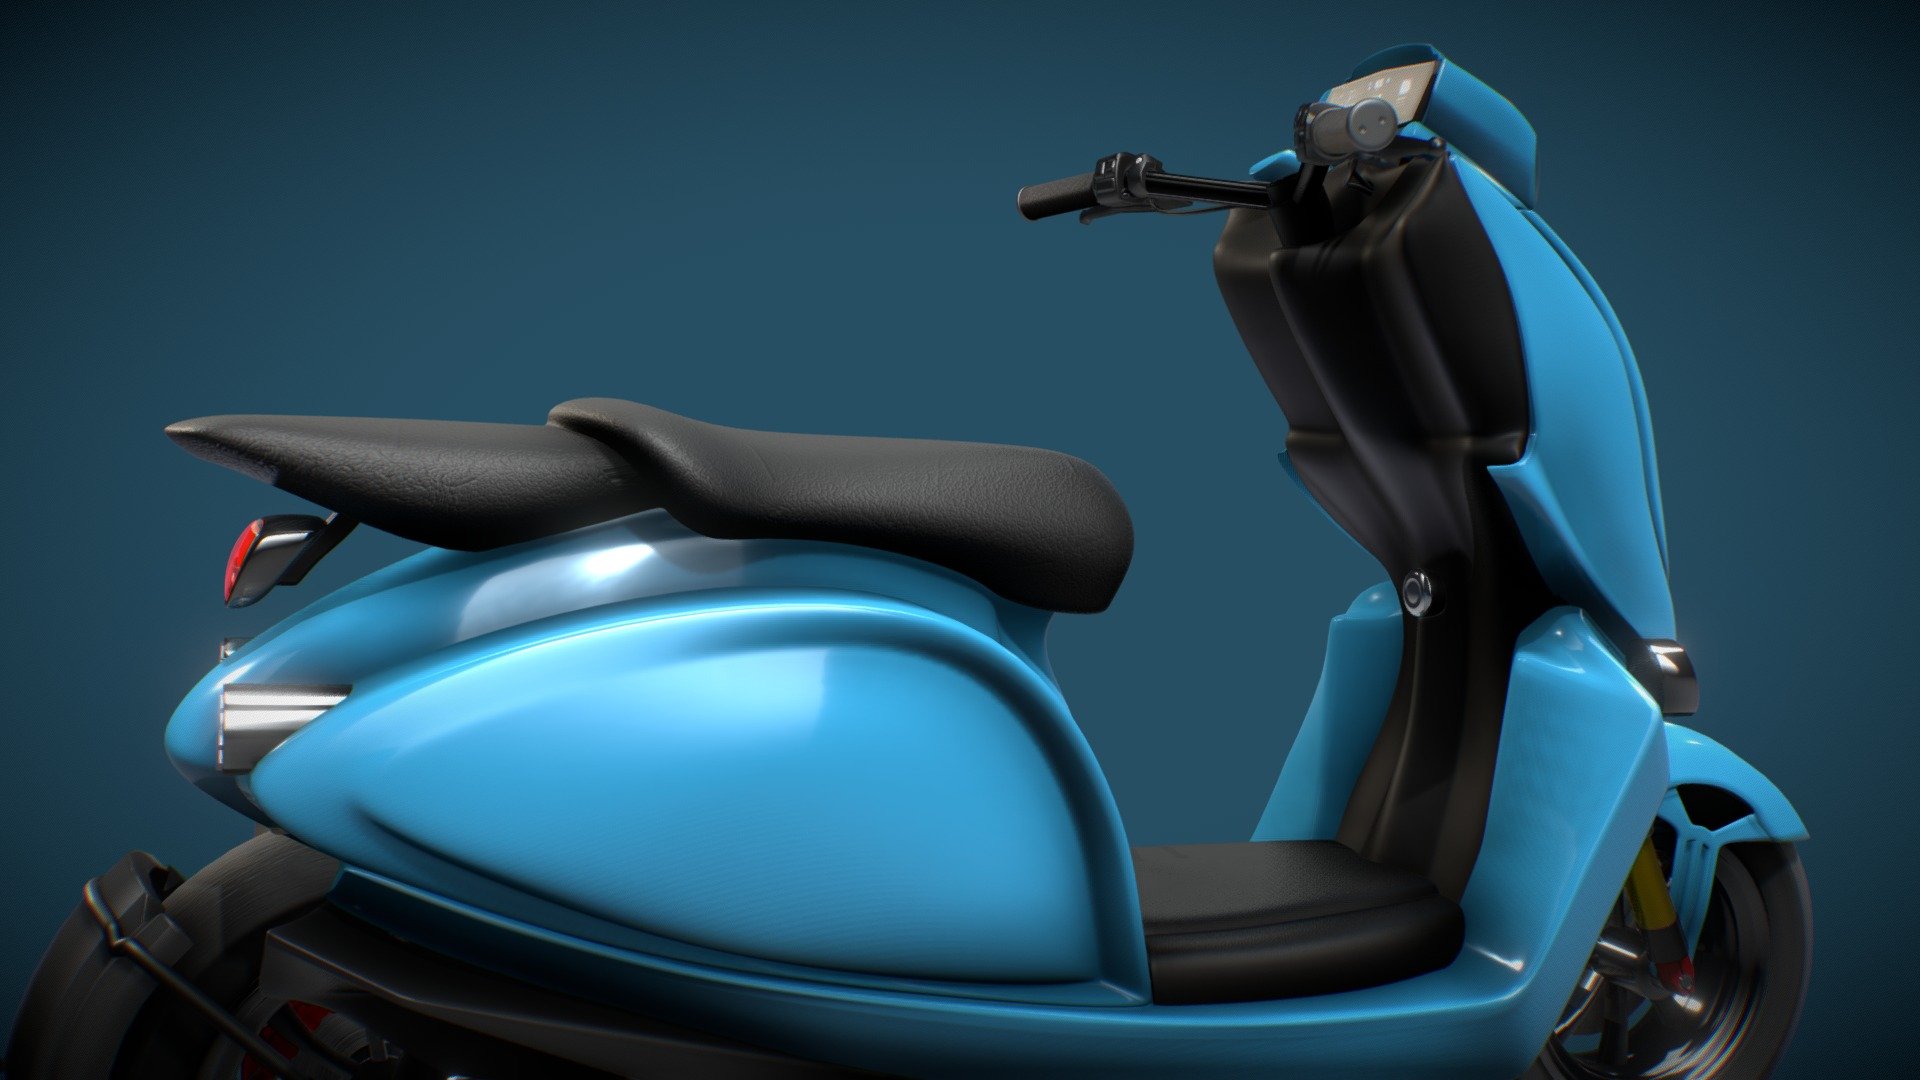 Pelican electric scooter is designed with a swappable battery system and a unique front storage that can store office equipments and files. Also, Pelican features a full touch display with plug and charge USB port.

The name Pelican is inspired from the pelican bird with a pouch on its beak, analogous to the front storage area of the concept 3d model